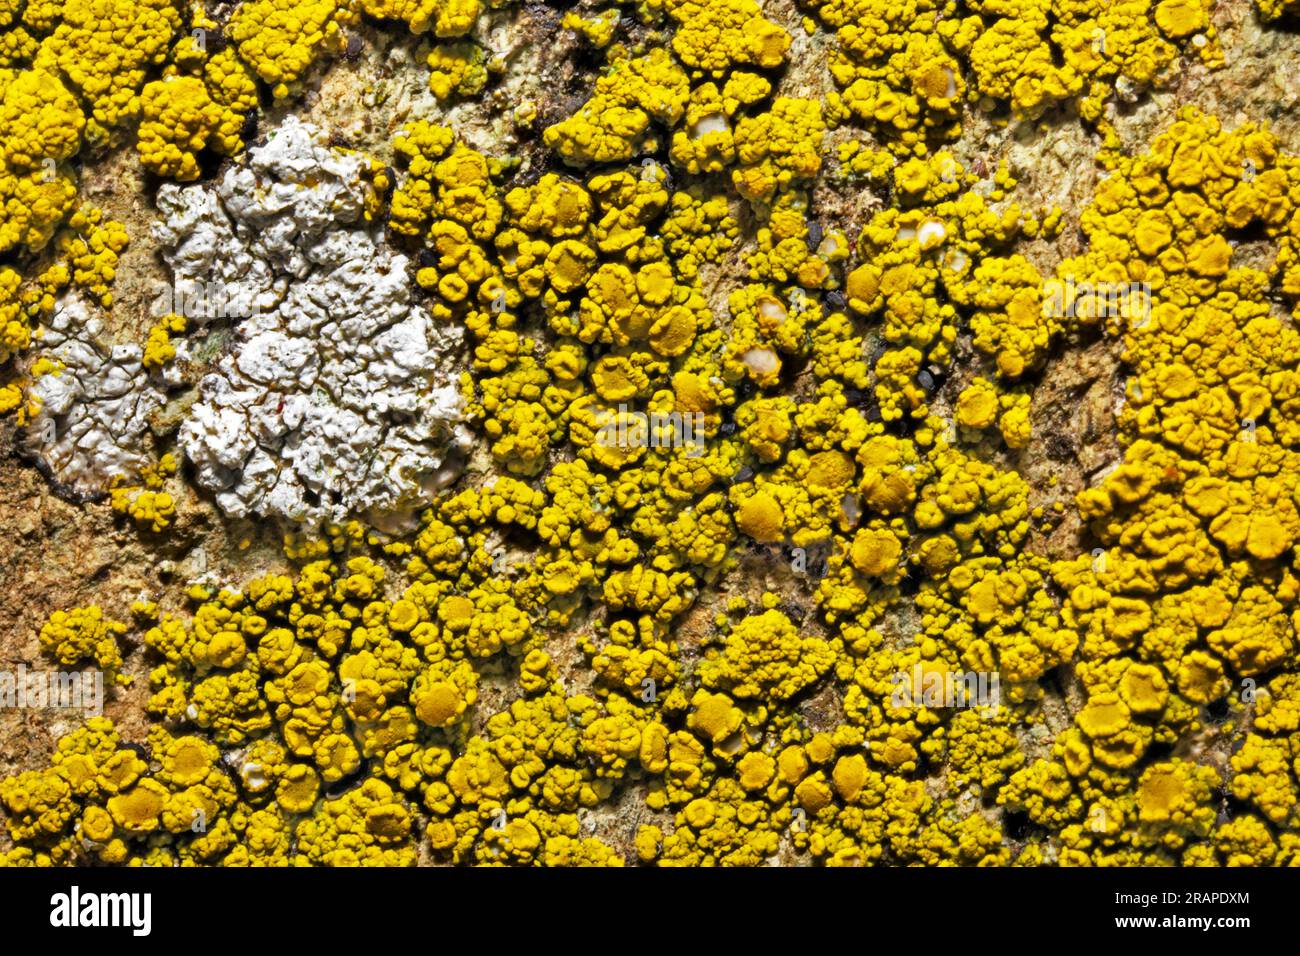 Candelariella vitellina is a crustose lichen found on siliceous and calcareous rocks and especially on bird-perch sites. It has a global distribution. Stock Photo